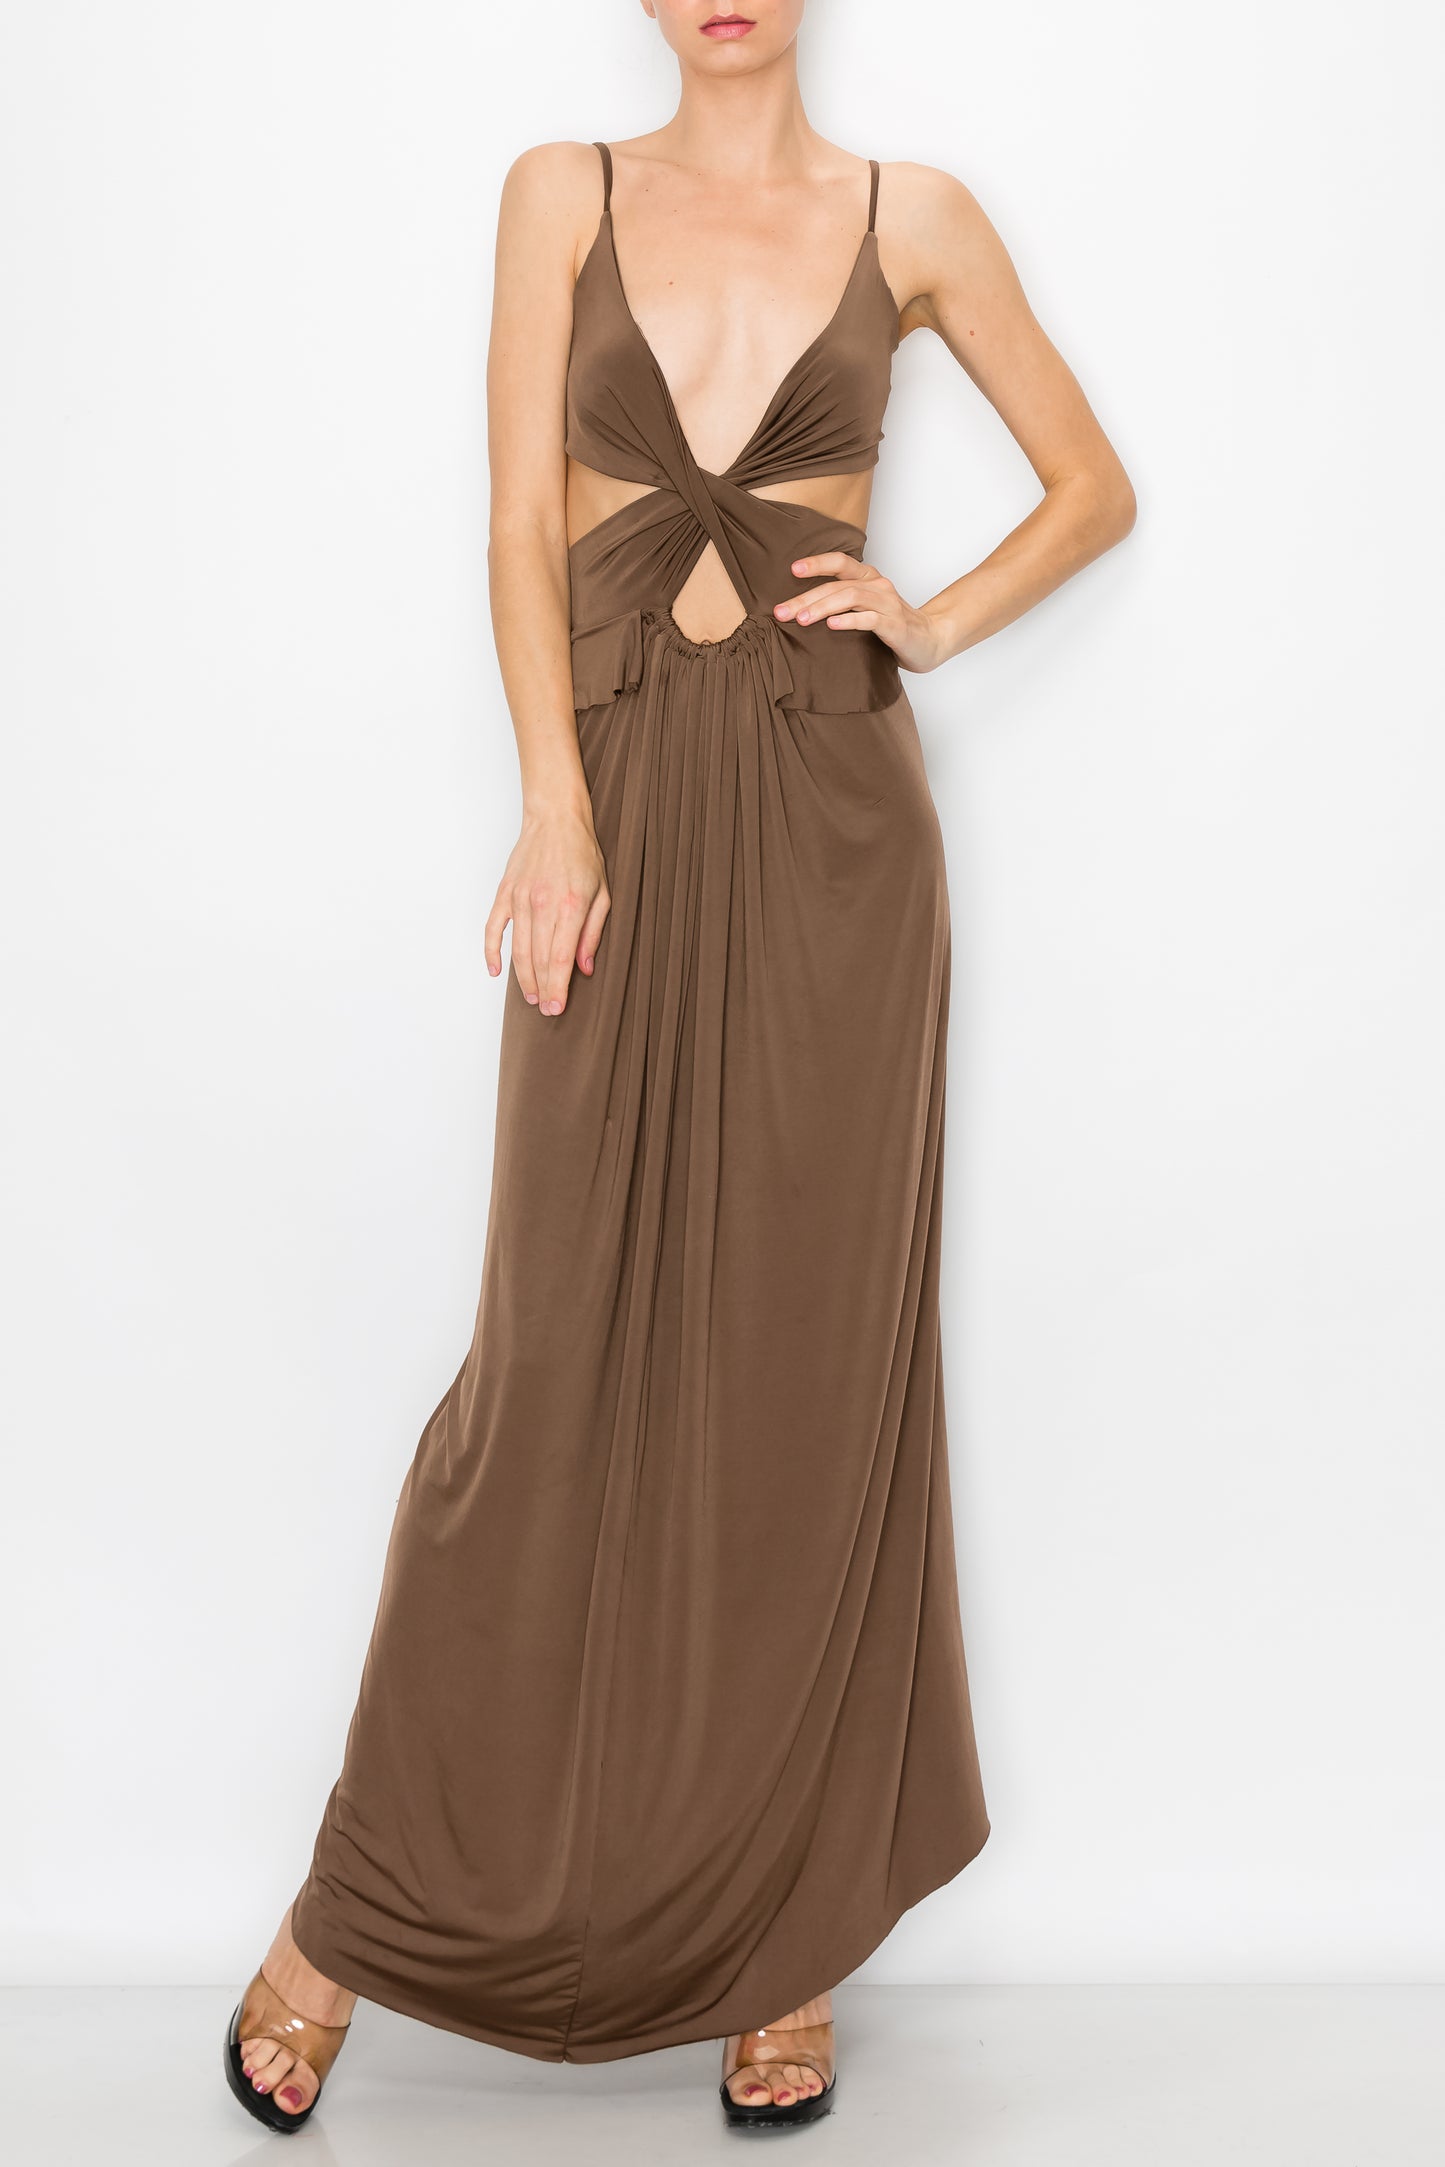 The Bomb Gown